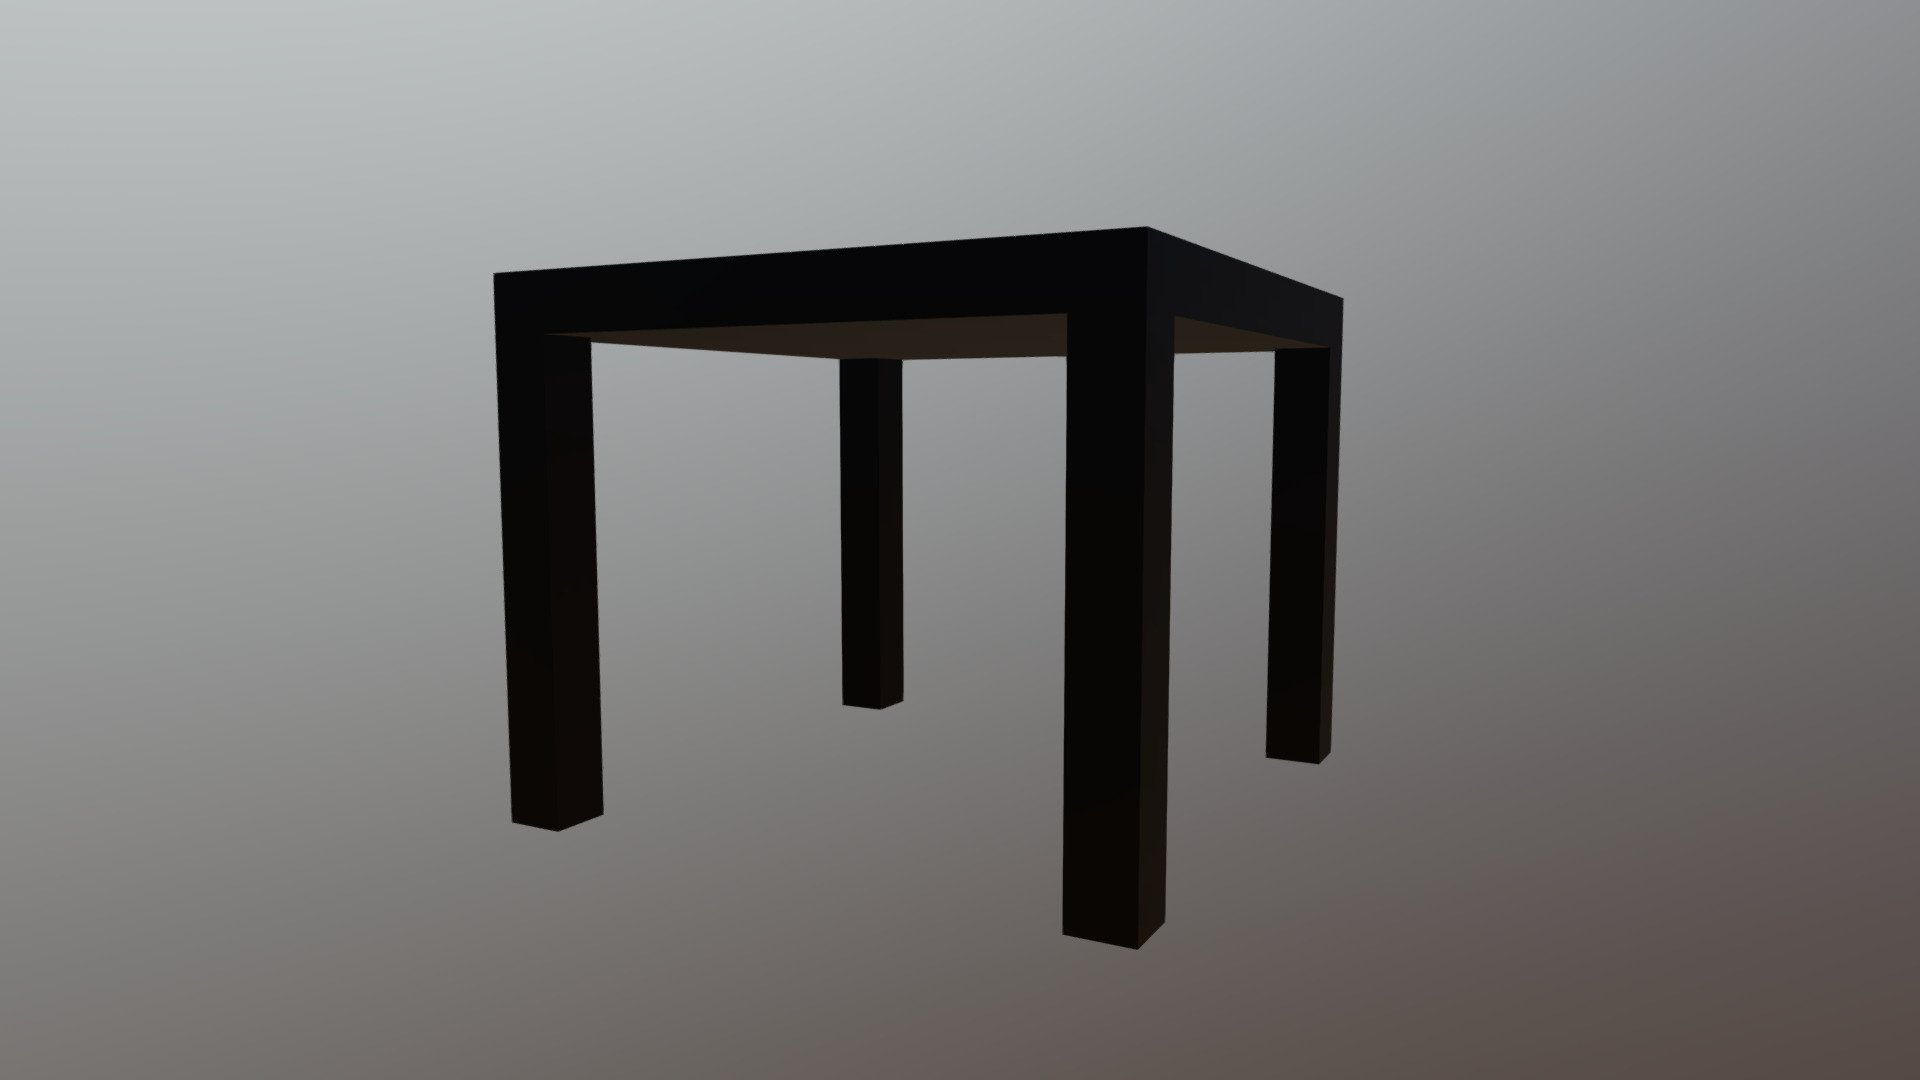 An exactly measured duplicate of the square IKEA LACK side table. (Note that it’s 10x the “actual size” using blender measurements. Divide the xyz dimensions by 10 if you want exact, or scale all 3 to 0.1) - IKEA LACK Side Table - 55x55x45cm - 3D model by HairMetalAddict 3d model